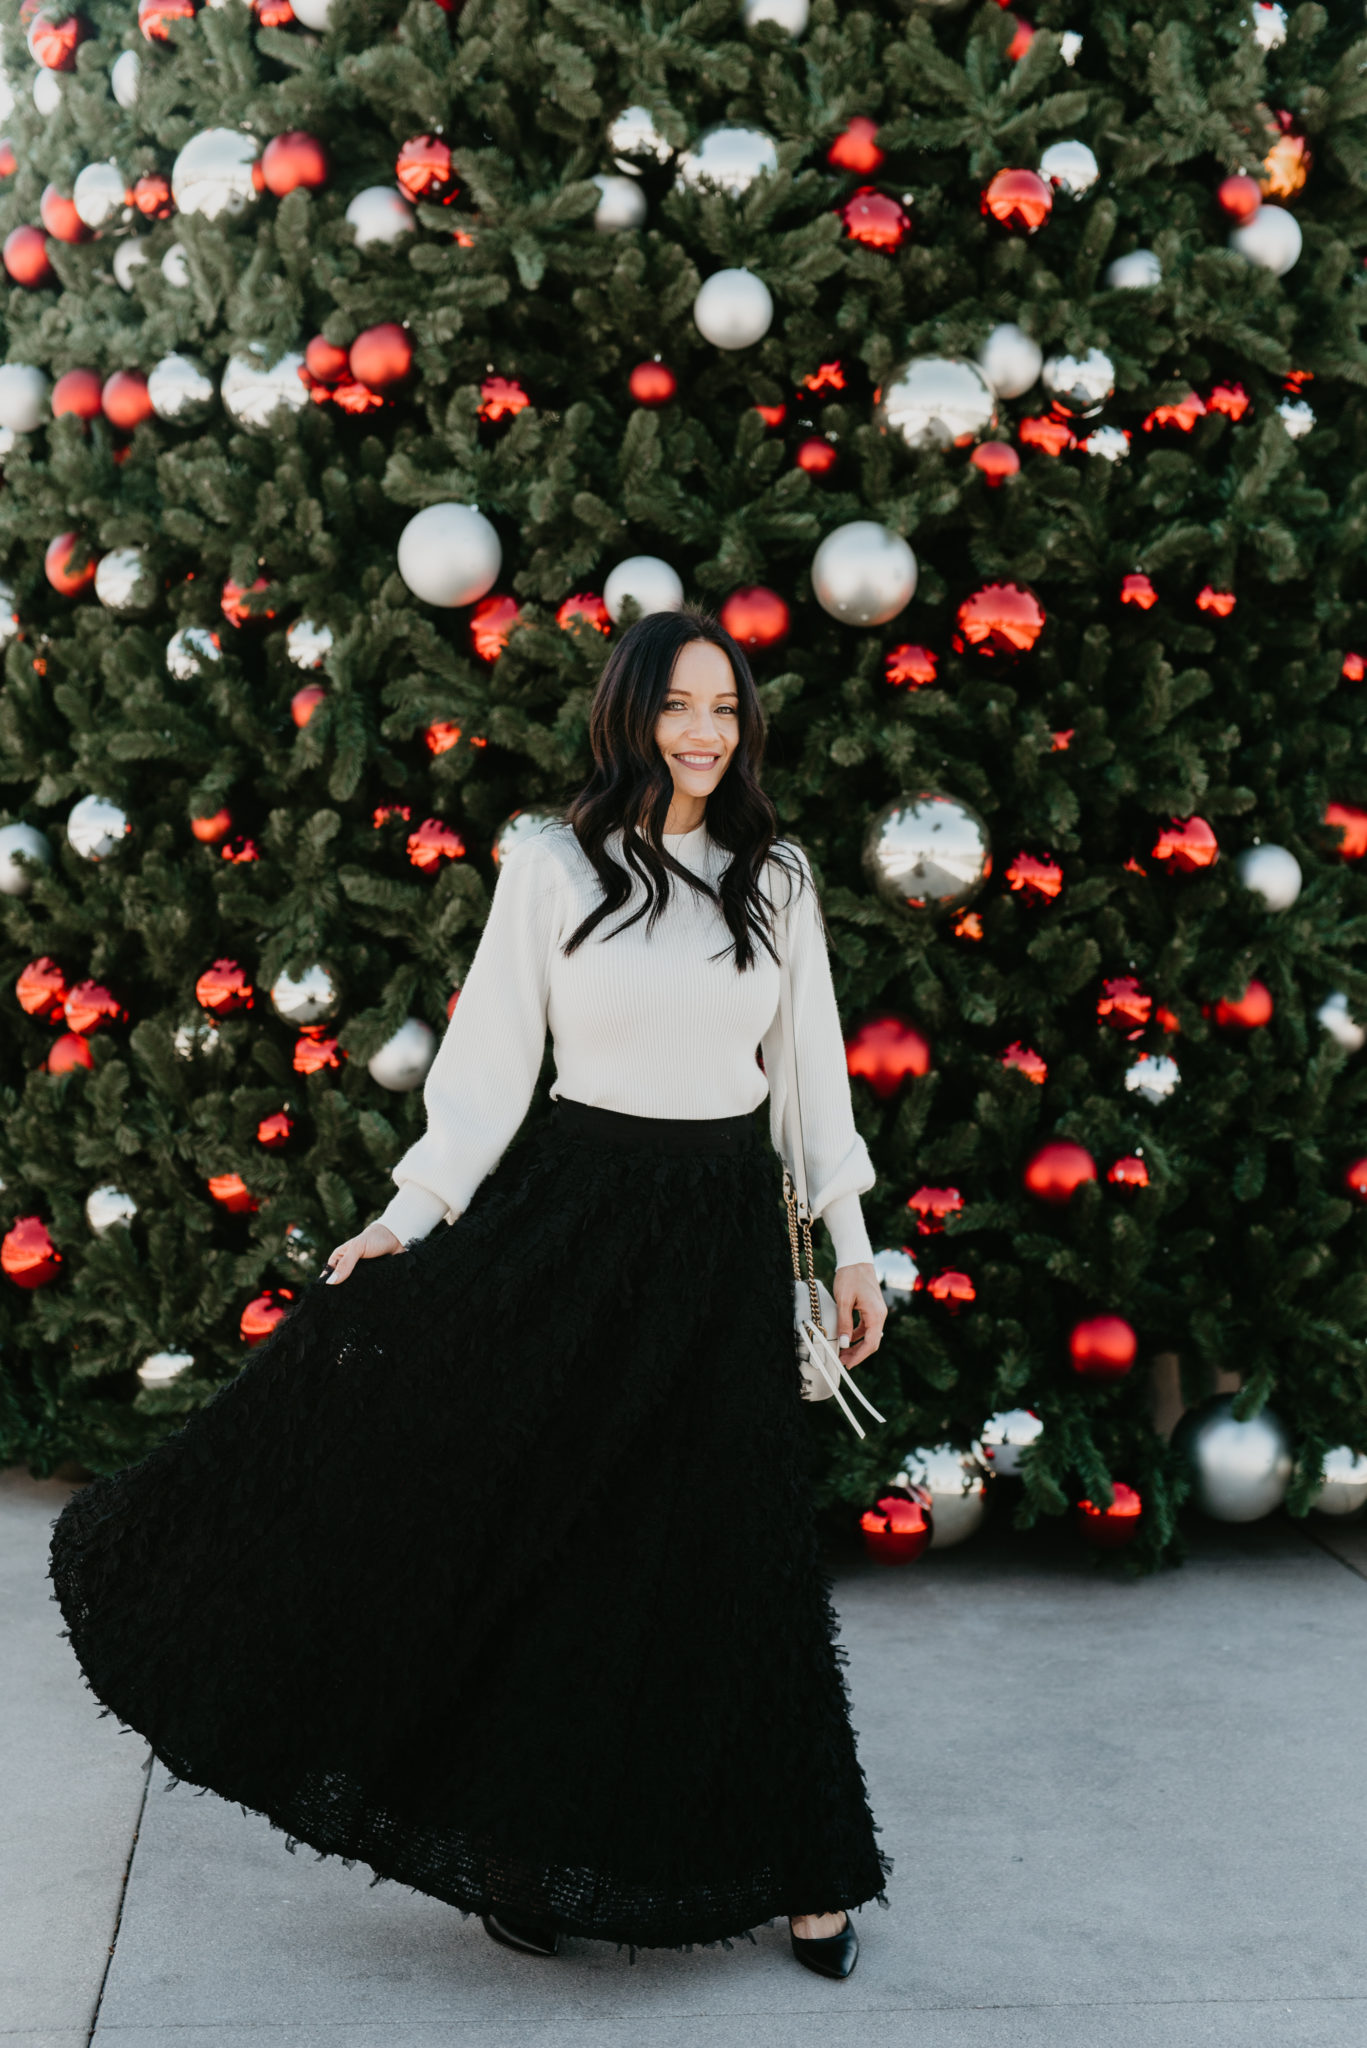 Festive Christmas Outfit Ideas featured by top US fashion blog, Outfits & Outings: image of a woman wearing an Anthropologie Feathered Maxi Skirt